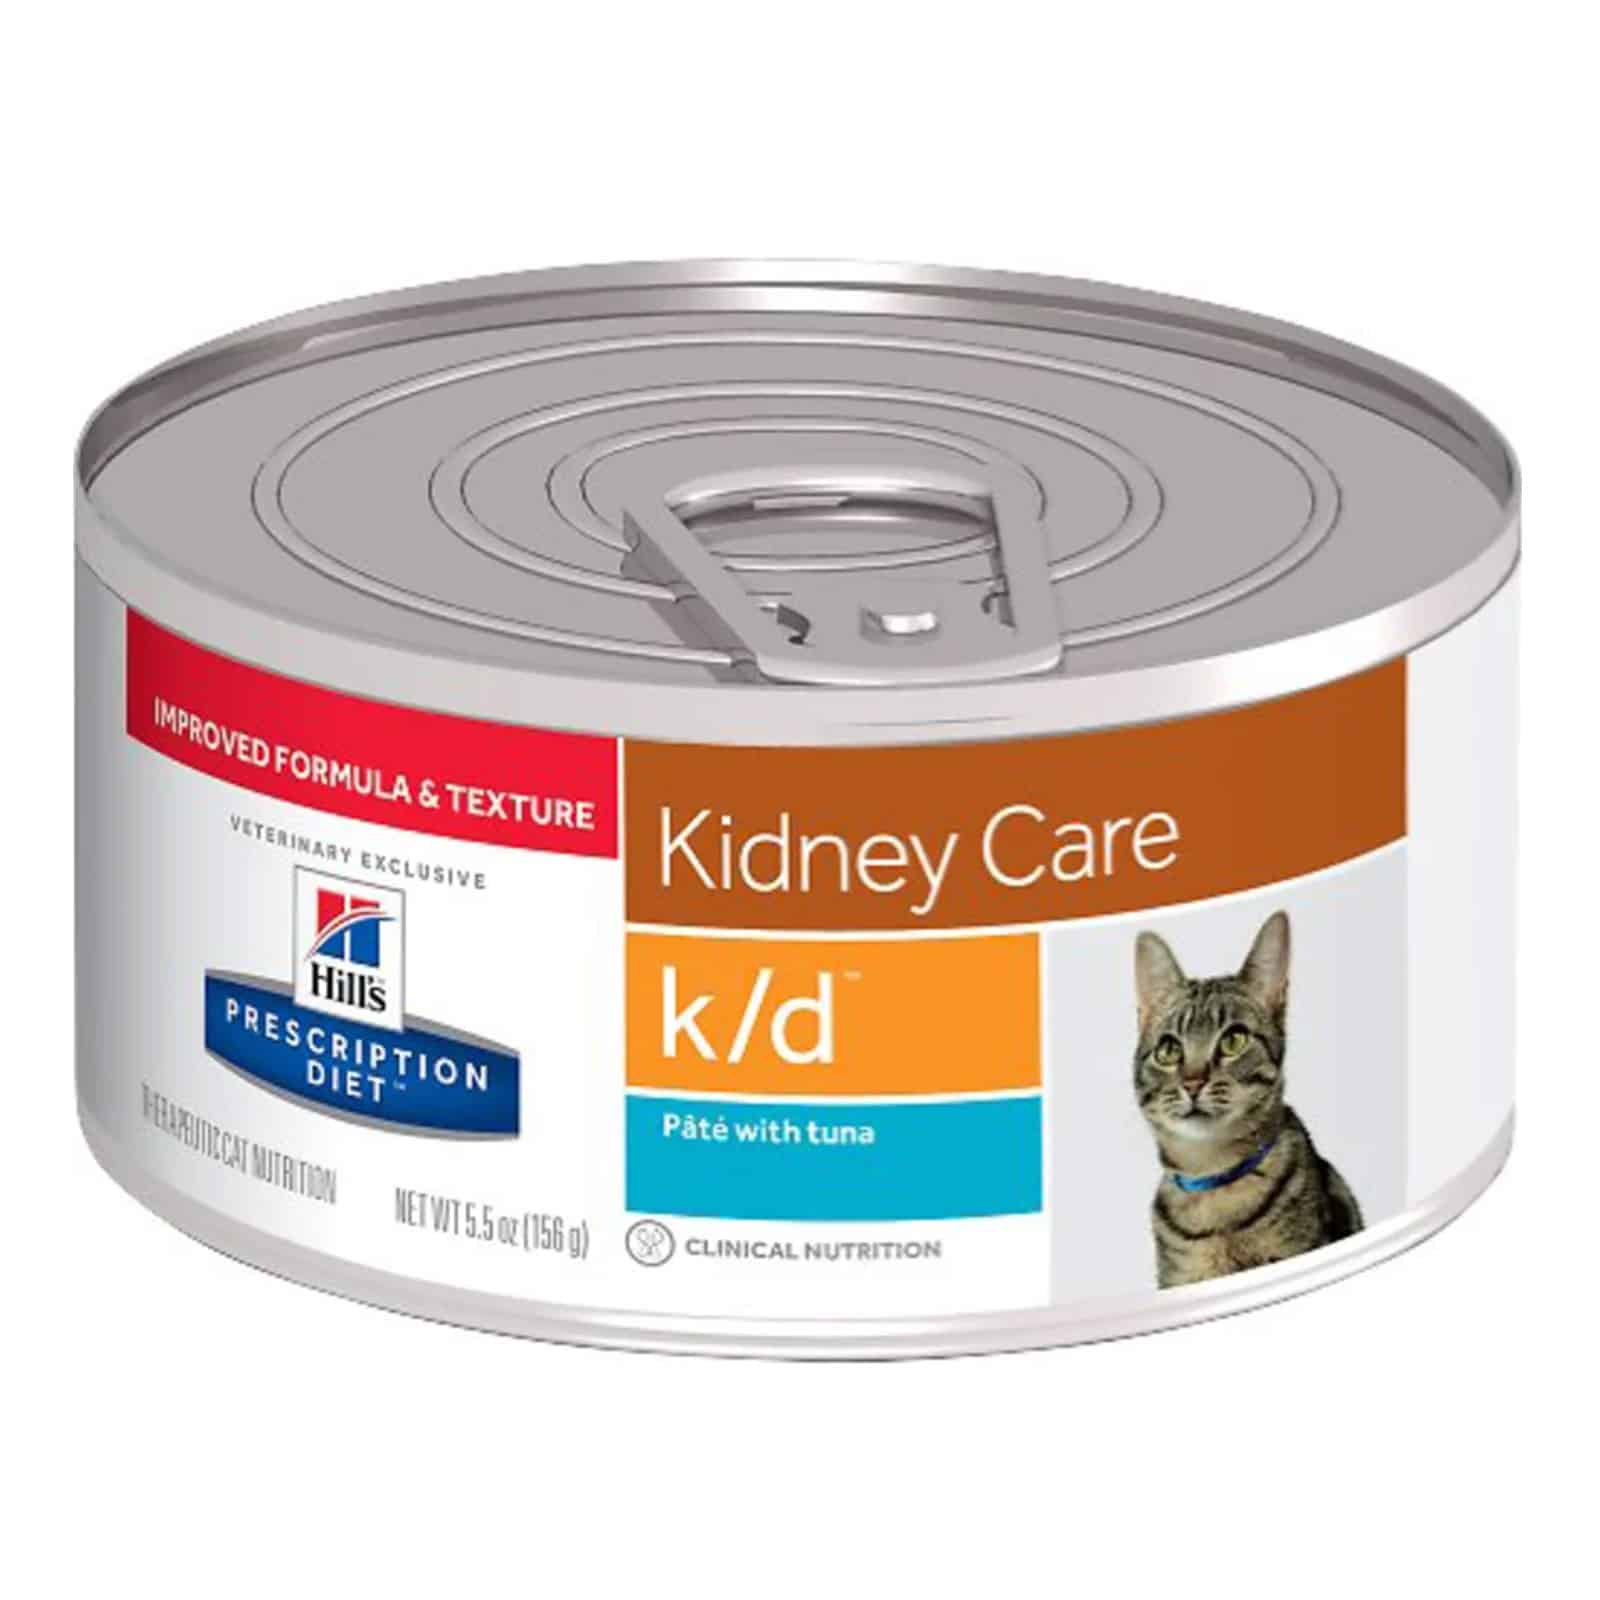 Buy Hills Prescription Diet k/d Kidney Care with Tuna Canned Cat Food ...